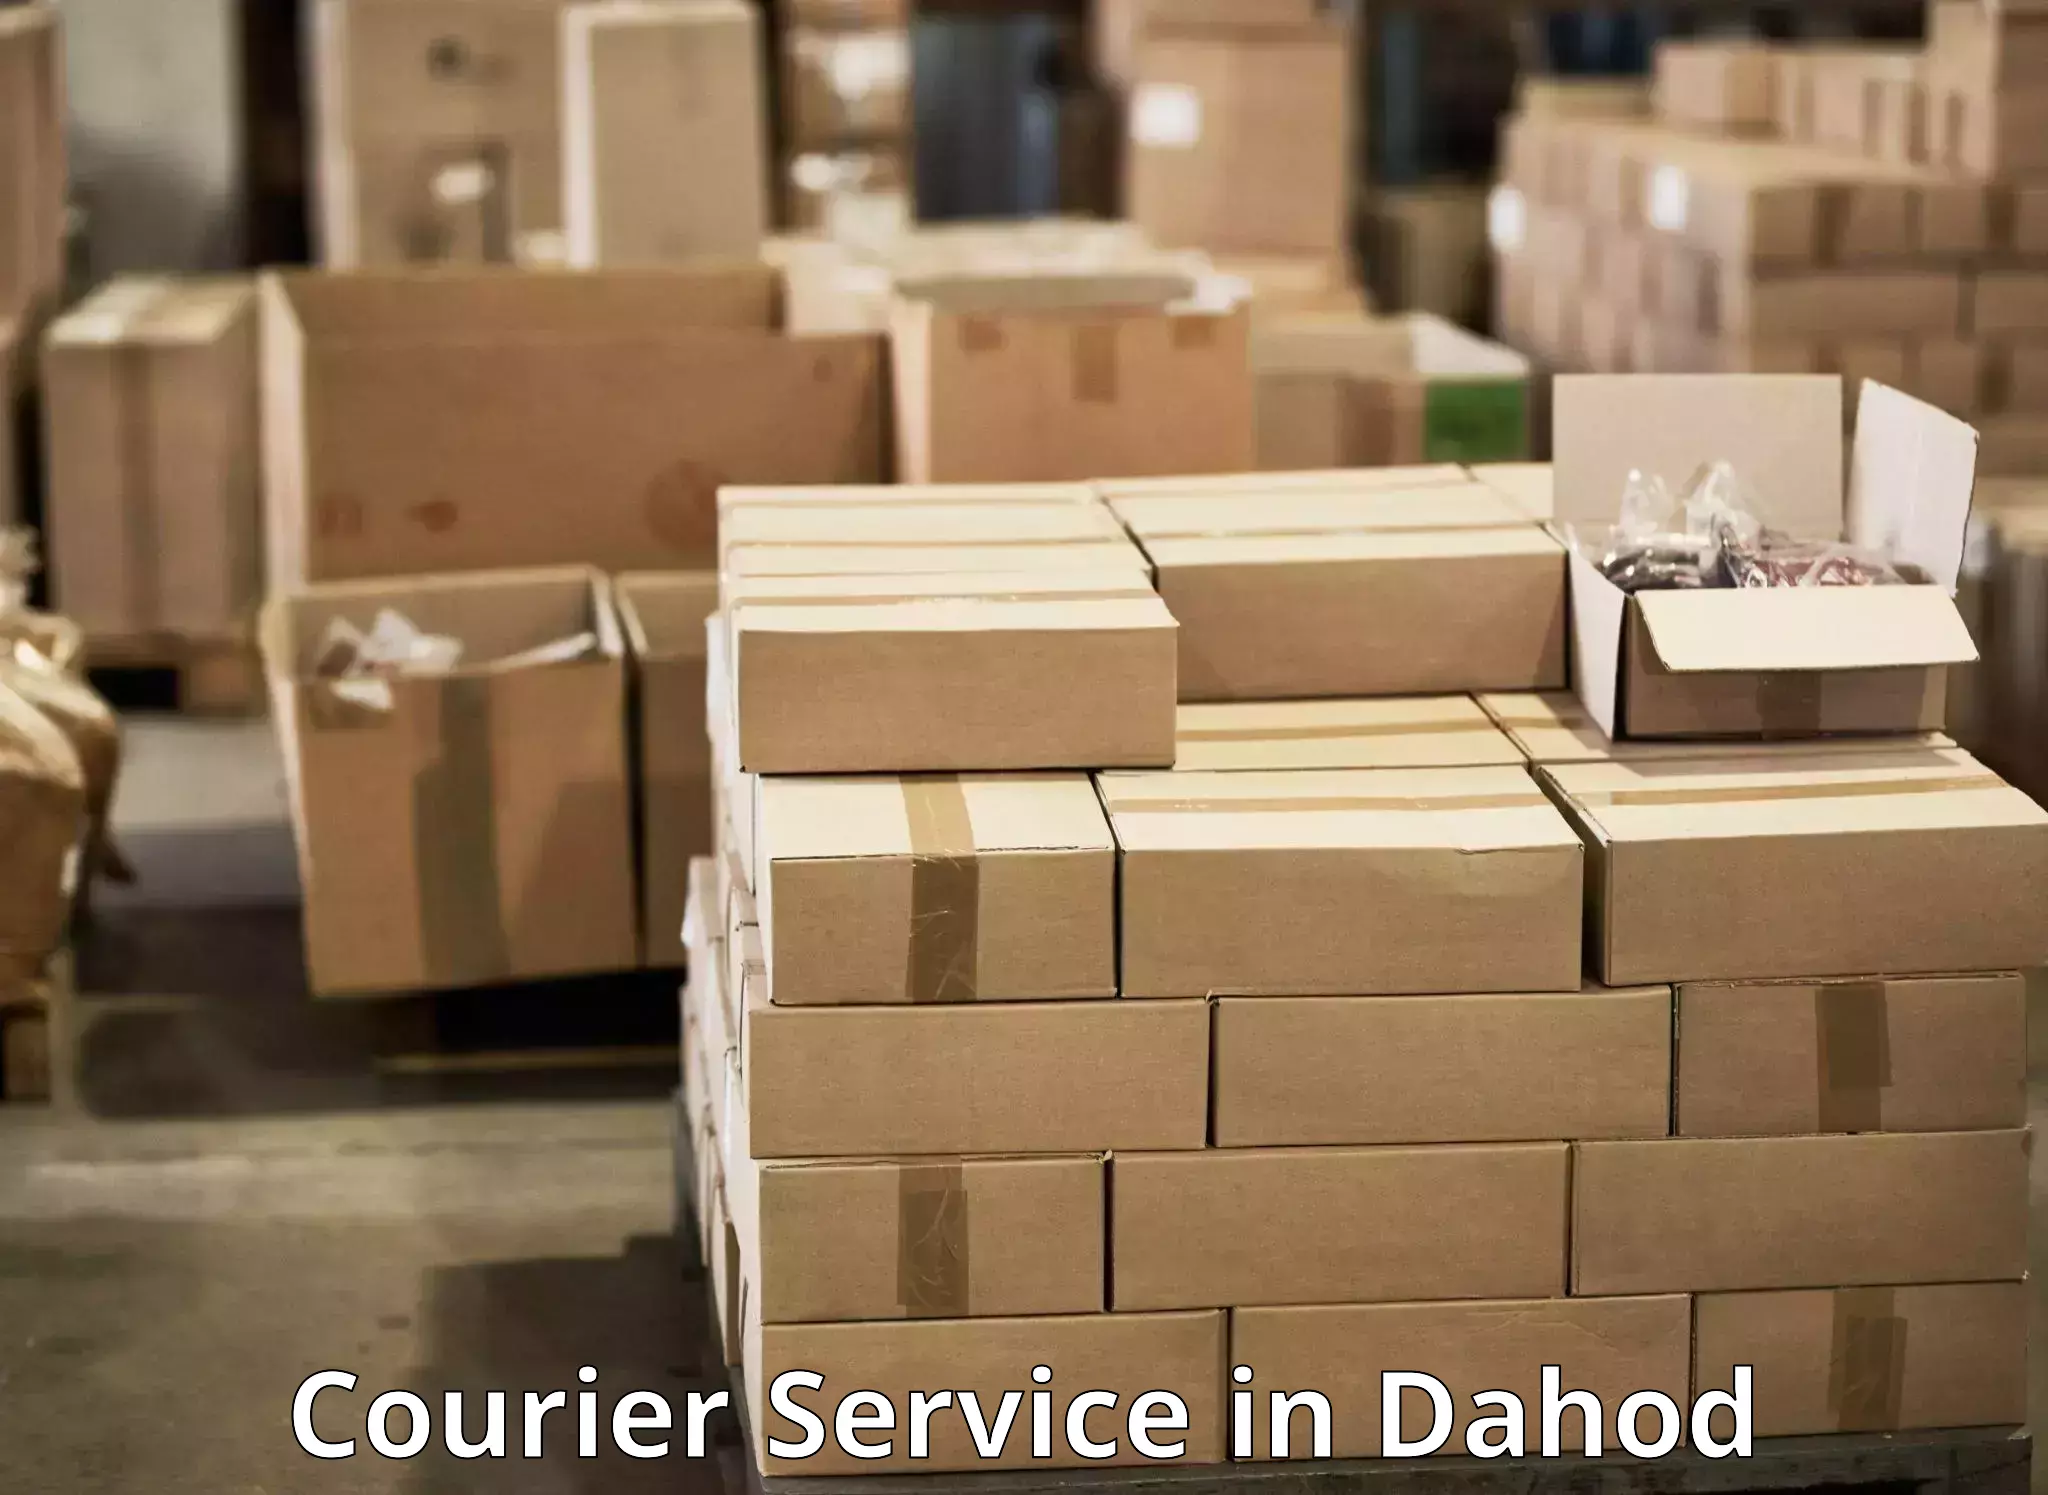 Courier services in Dahod